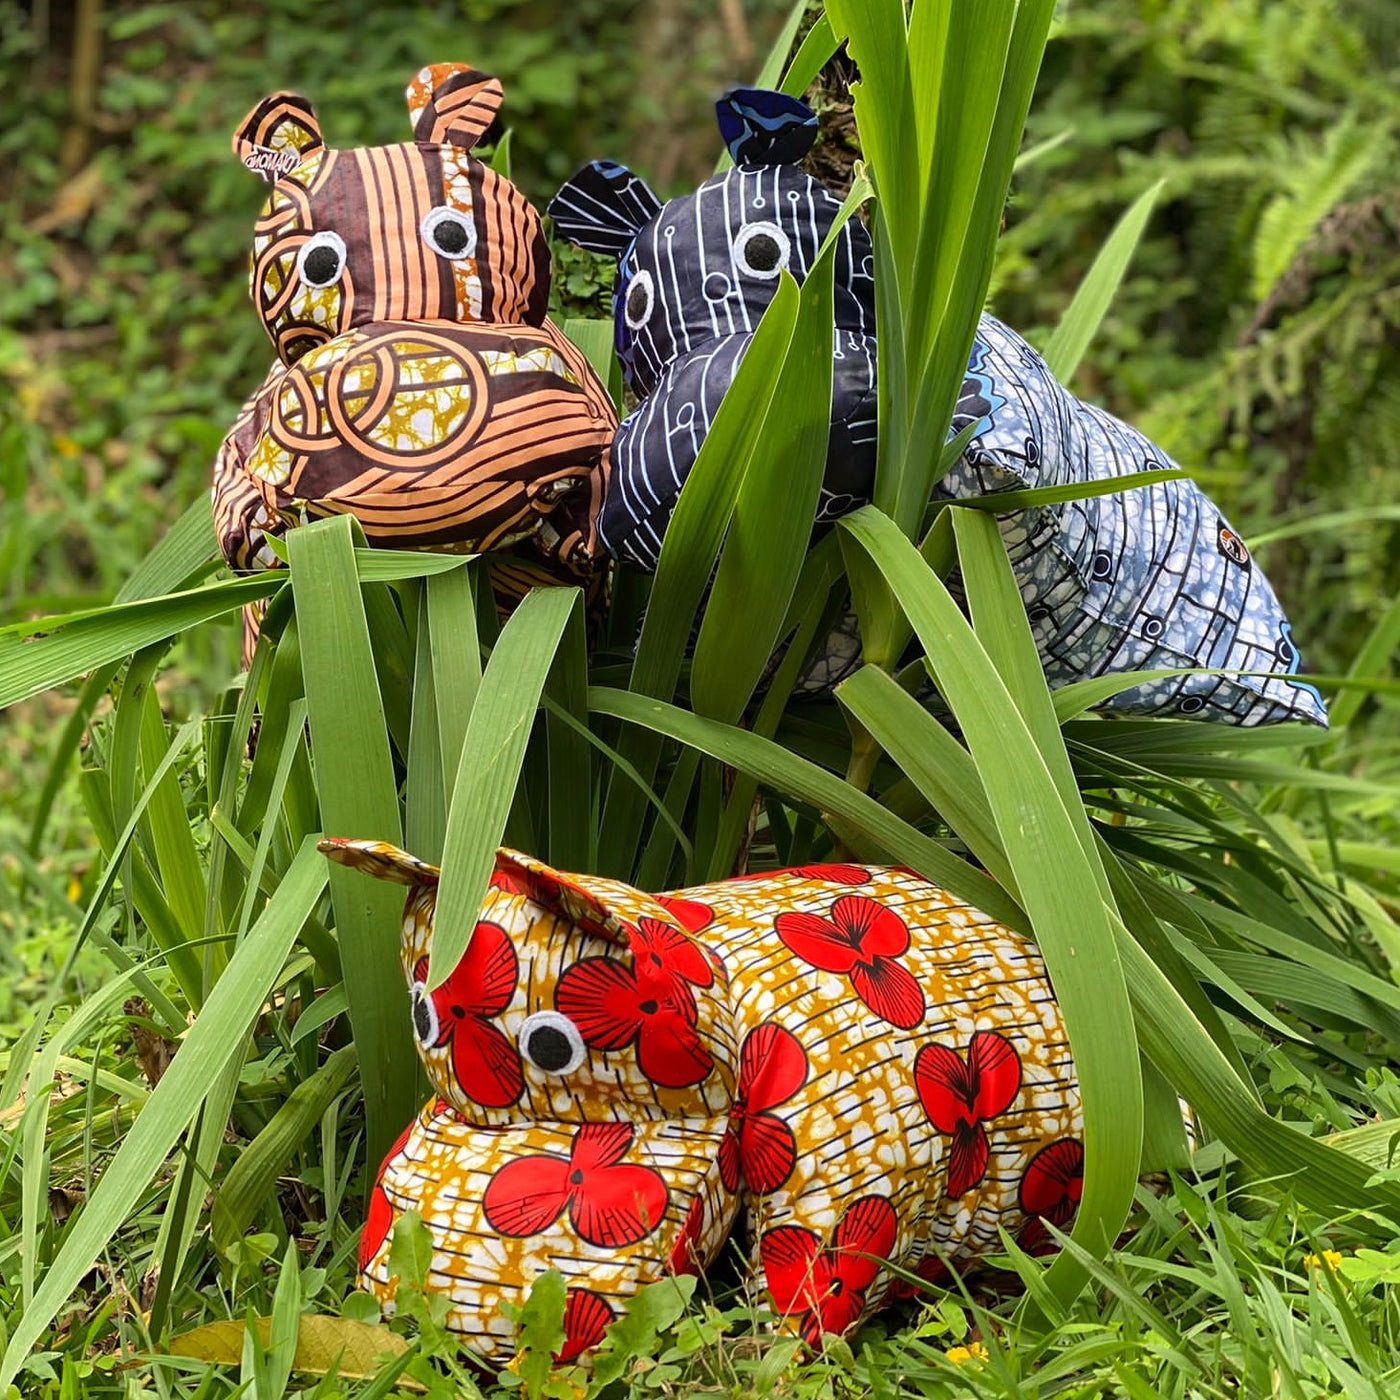 Plush animals from the Congo (DRC)